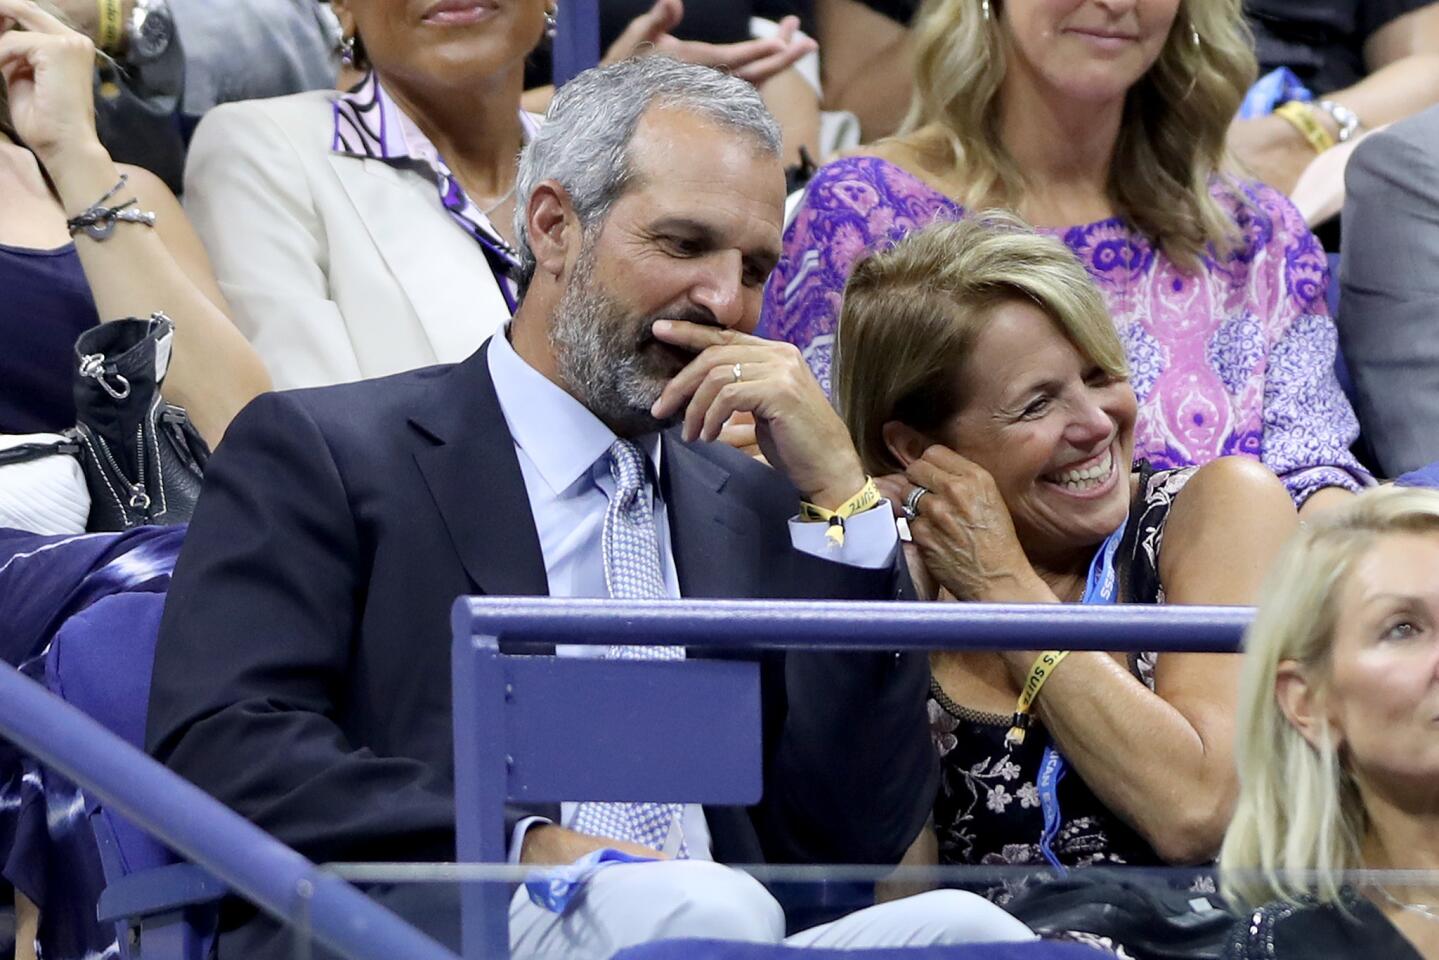 Katie Couric and her husband John Molner attend the Women's Singles first-round match between Maria Sharapova of Russia and Serena Williams of the United States during day one of the 2019 U.S. Open at the USTA Billie Jean King National Tennis Center on Aug. 26, 2019, in Flushing, Queens.